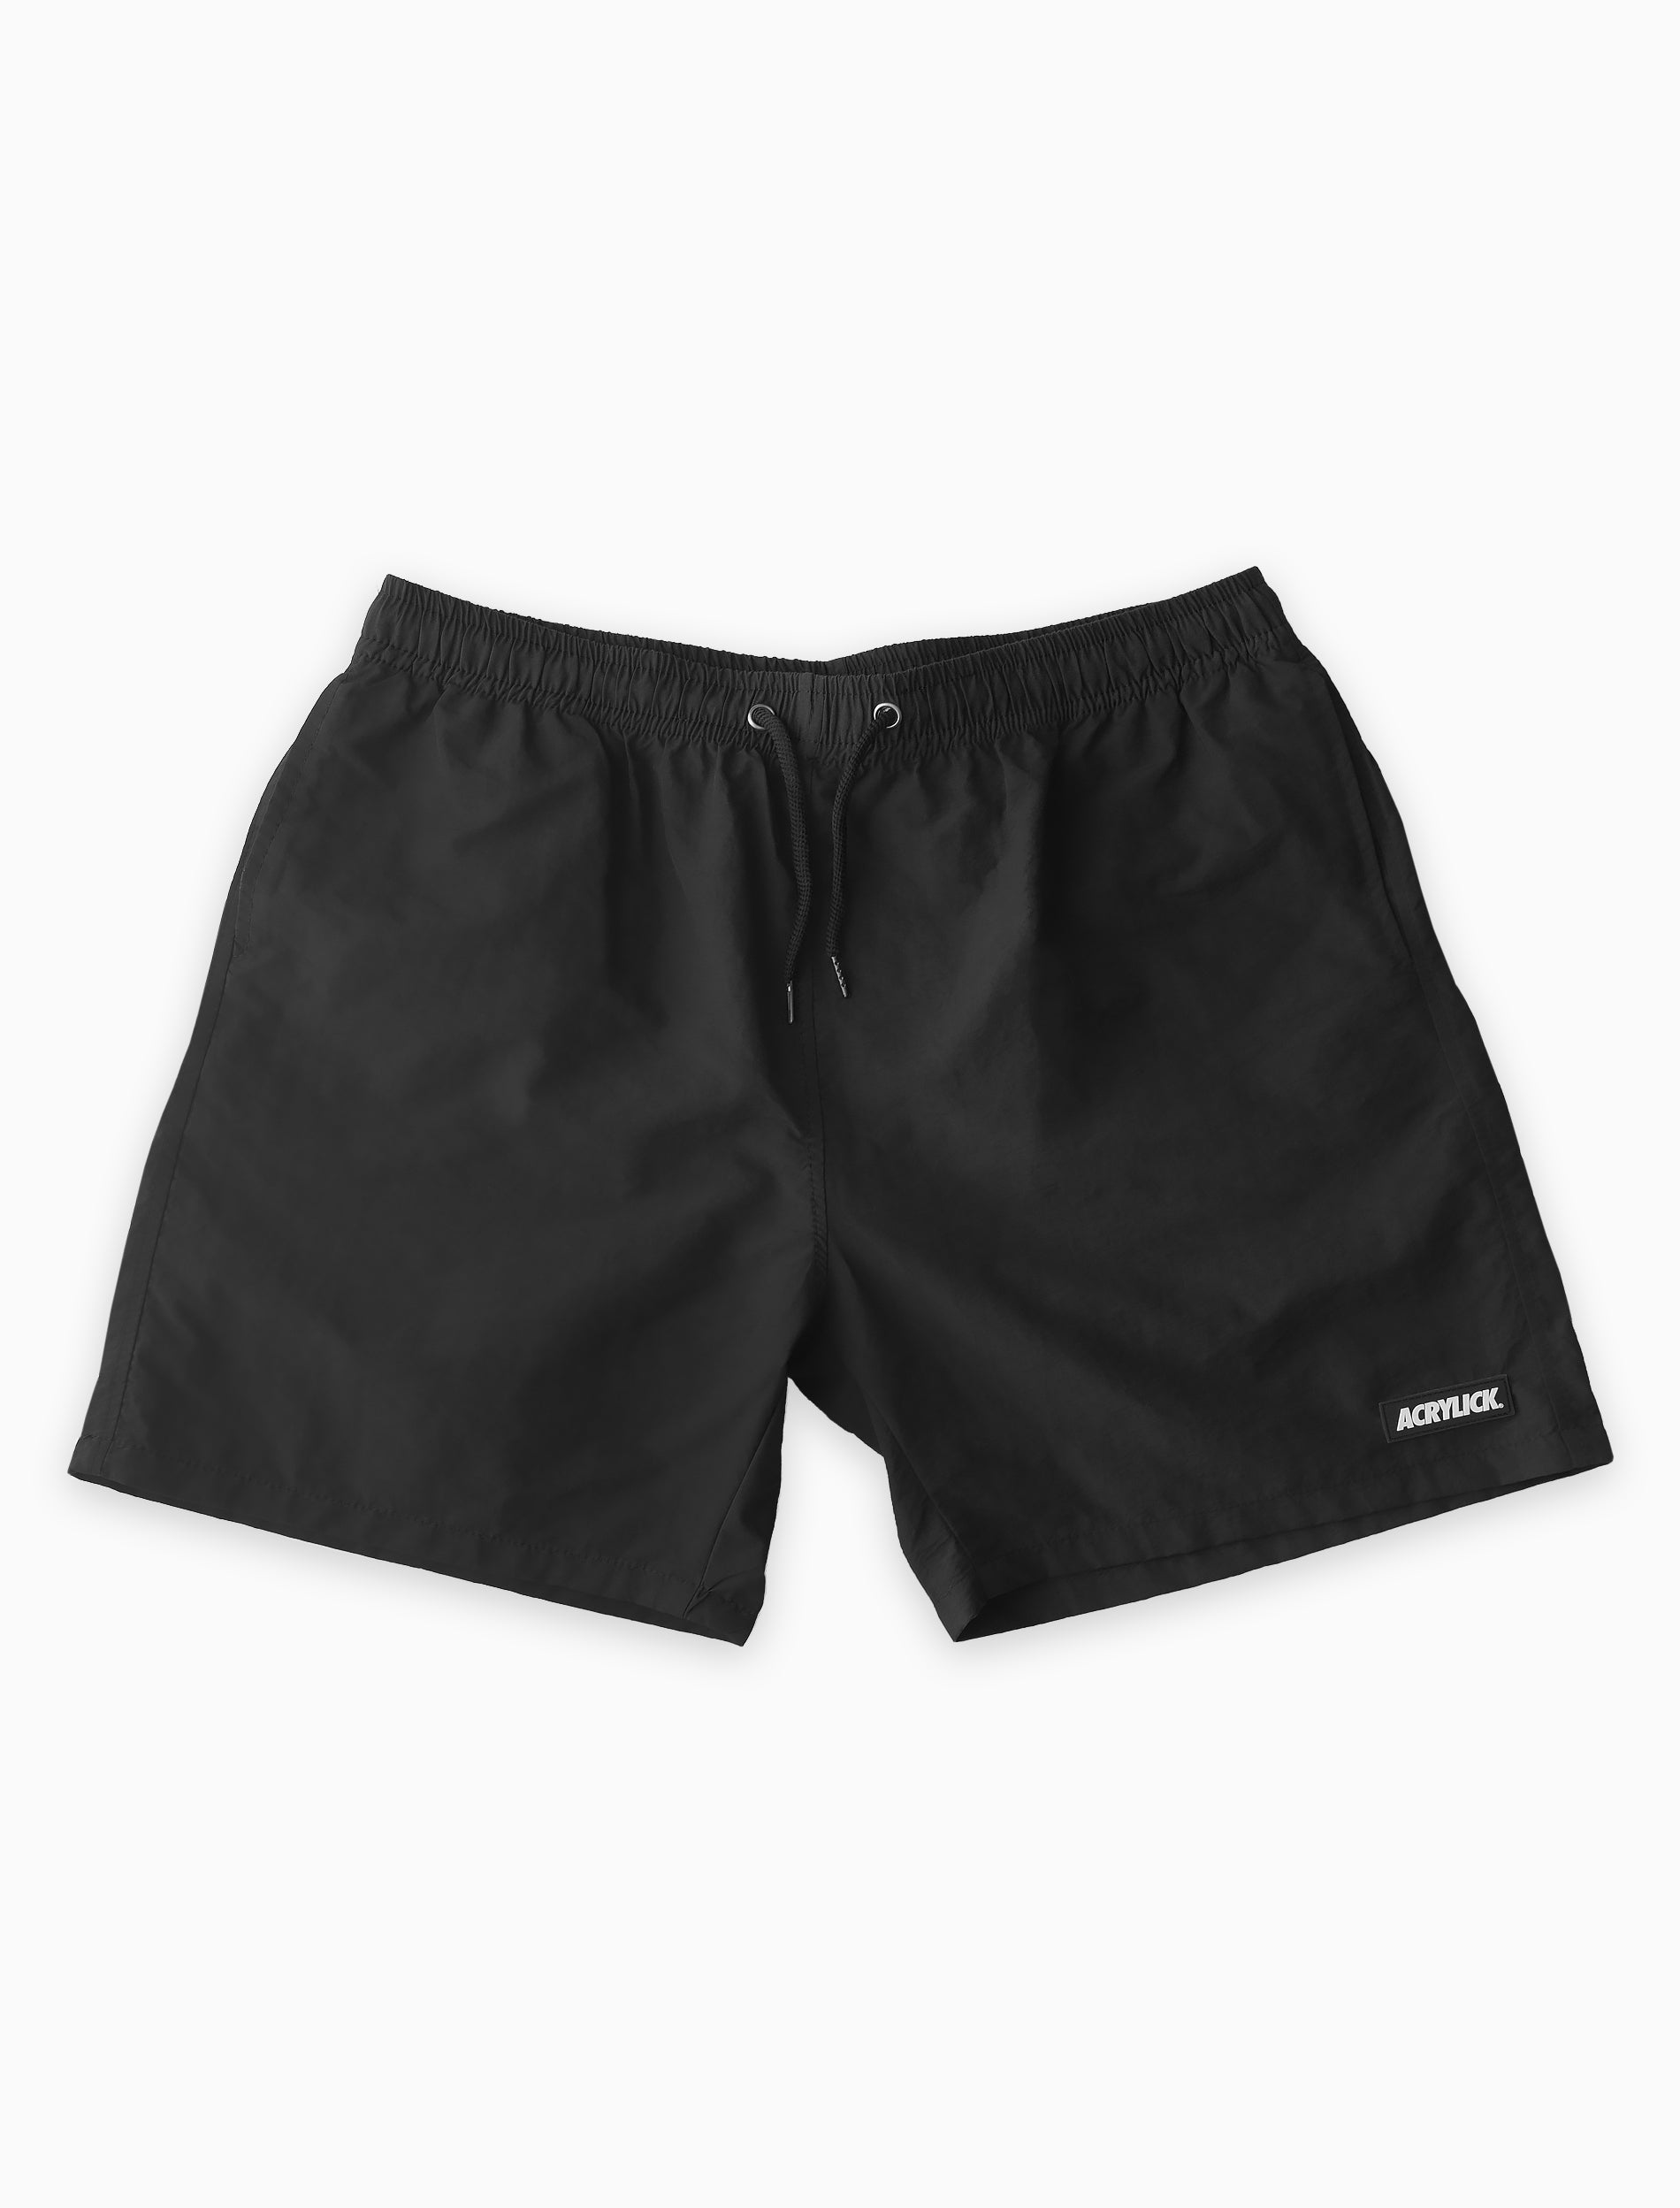 Our Quick Dry Water Shorts are crafted with 100% Nylon with a relaxed fit. Featuring the Acrylick® 3D Rubber Patch, they're made with sustainable woven nylon for a smooth, quick-drying fabric. Elastic waistband with shoestring drawcord, sewn eyelets, side & back pockets. Make them ideal for any activity.